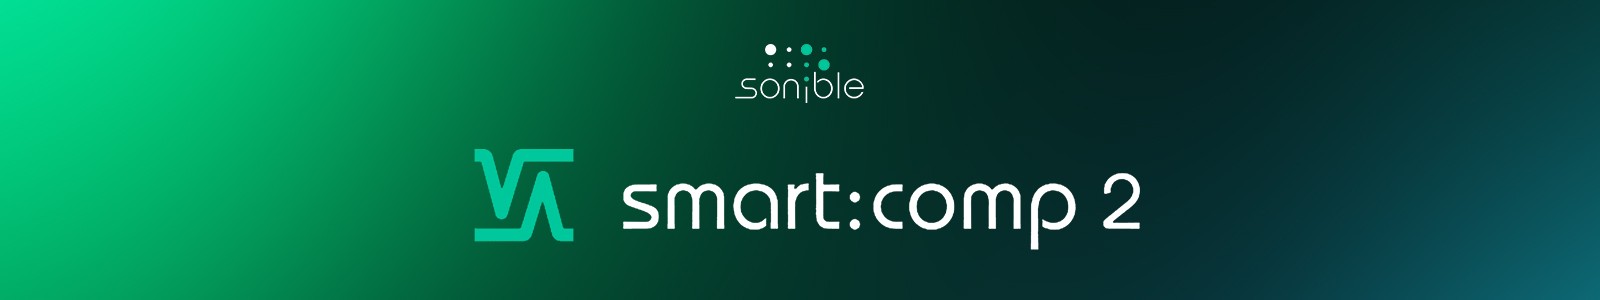 smart:comp 2 by Sonible